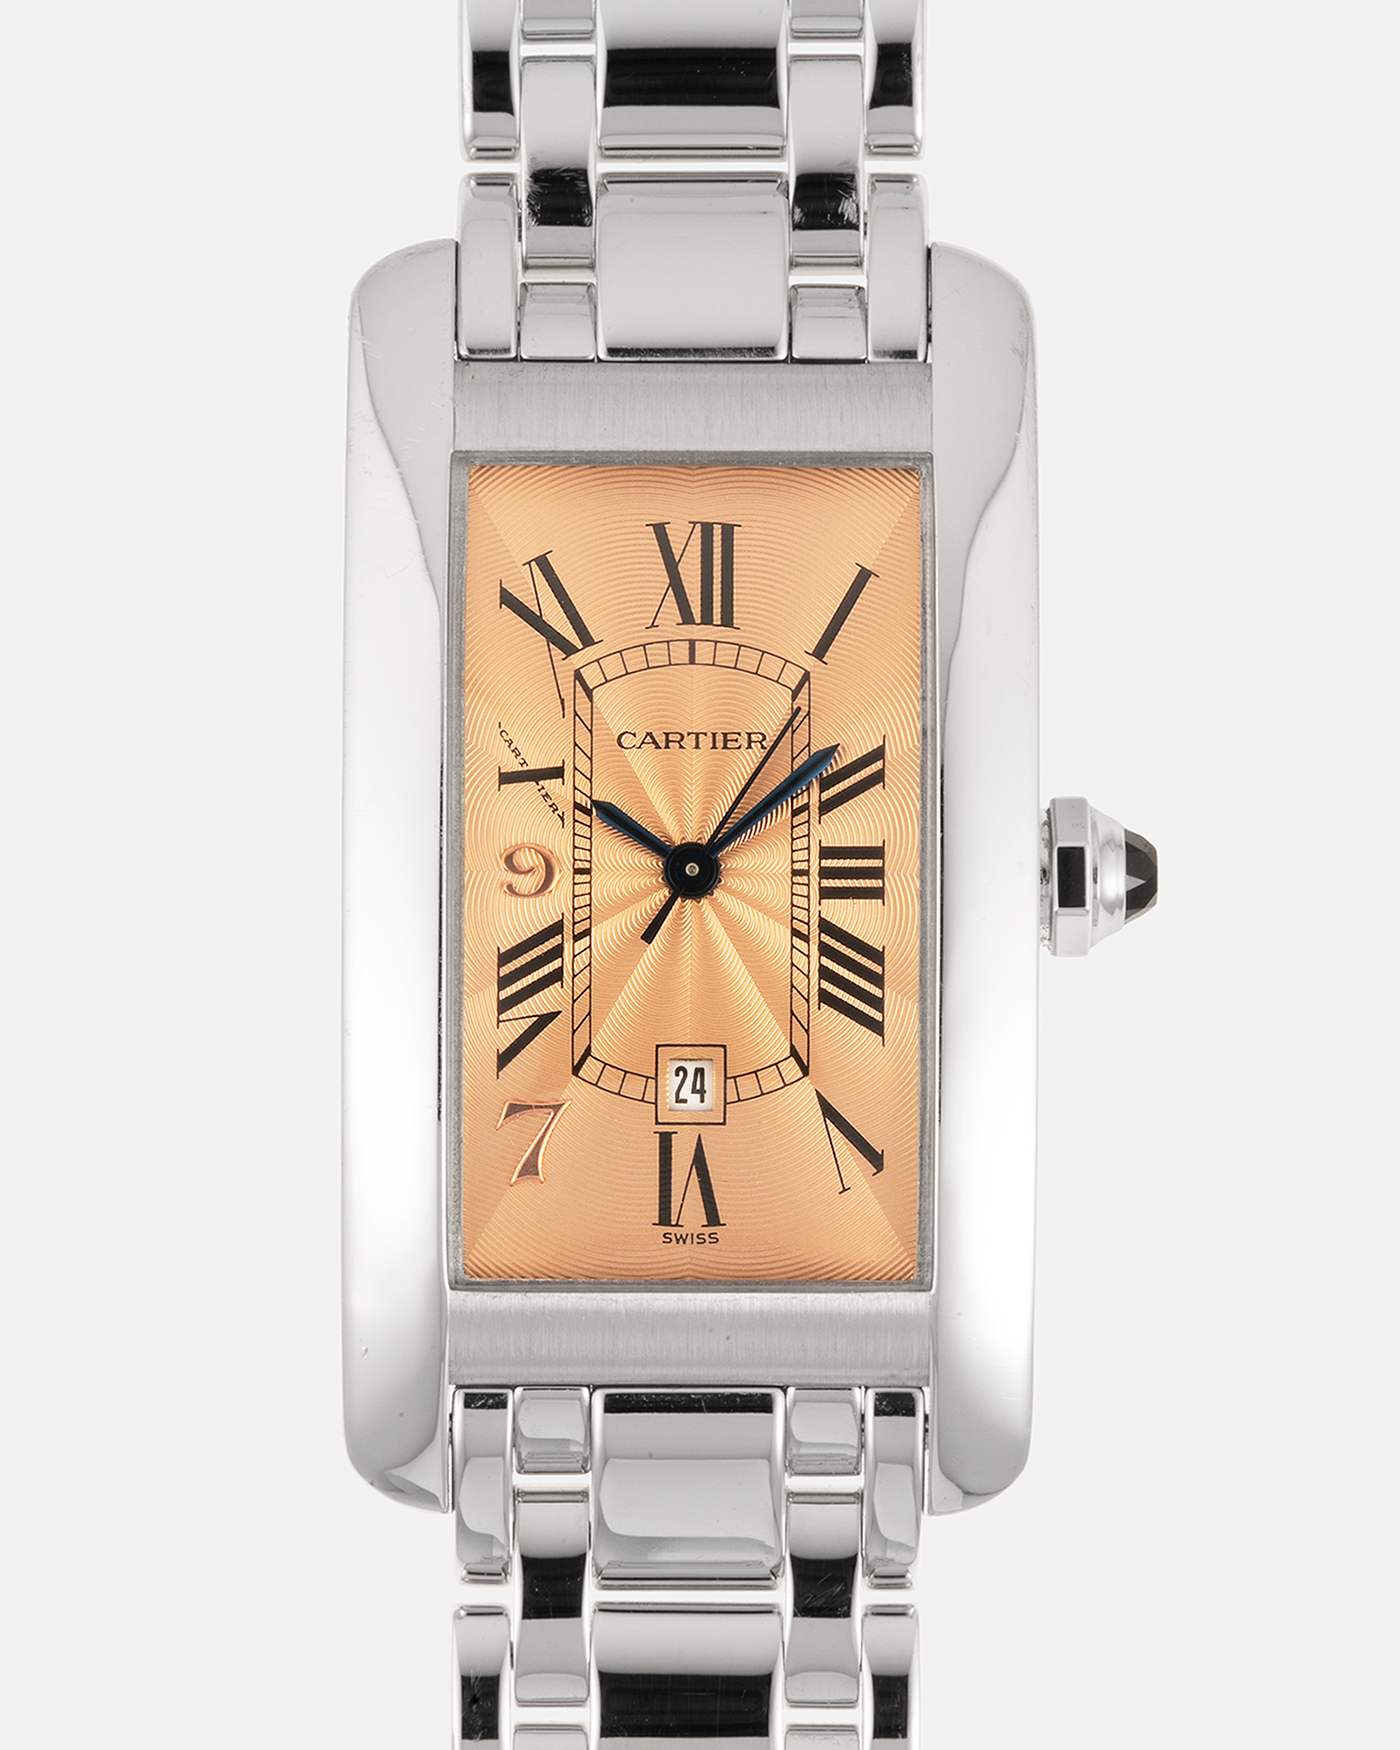 Brand: Cartier Year: 1997 Model: Tank Americaine Hong Kong ‘97’ Limited Edition of 97 pieces Reference: 1726 Material: 18-carat White Gold Movement: Cartier Cal. 077, Self-Winding Case Dimensions: 41mm x 23mm Lug Width: 18mm Bracelet: Cartier 18-carat White Gold Bracelet with Signed Deployant Clasp